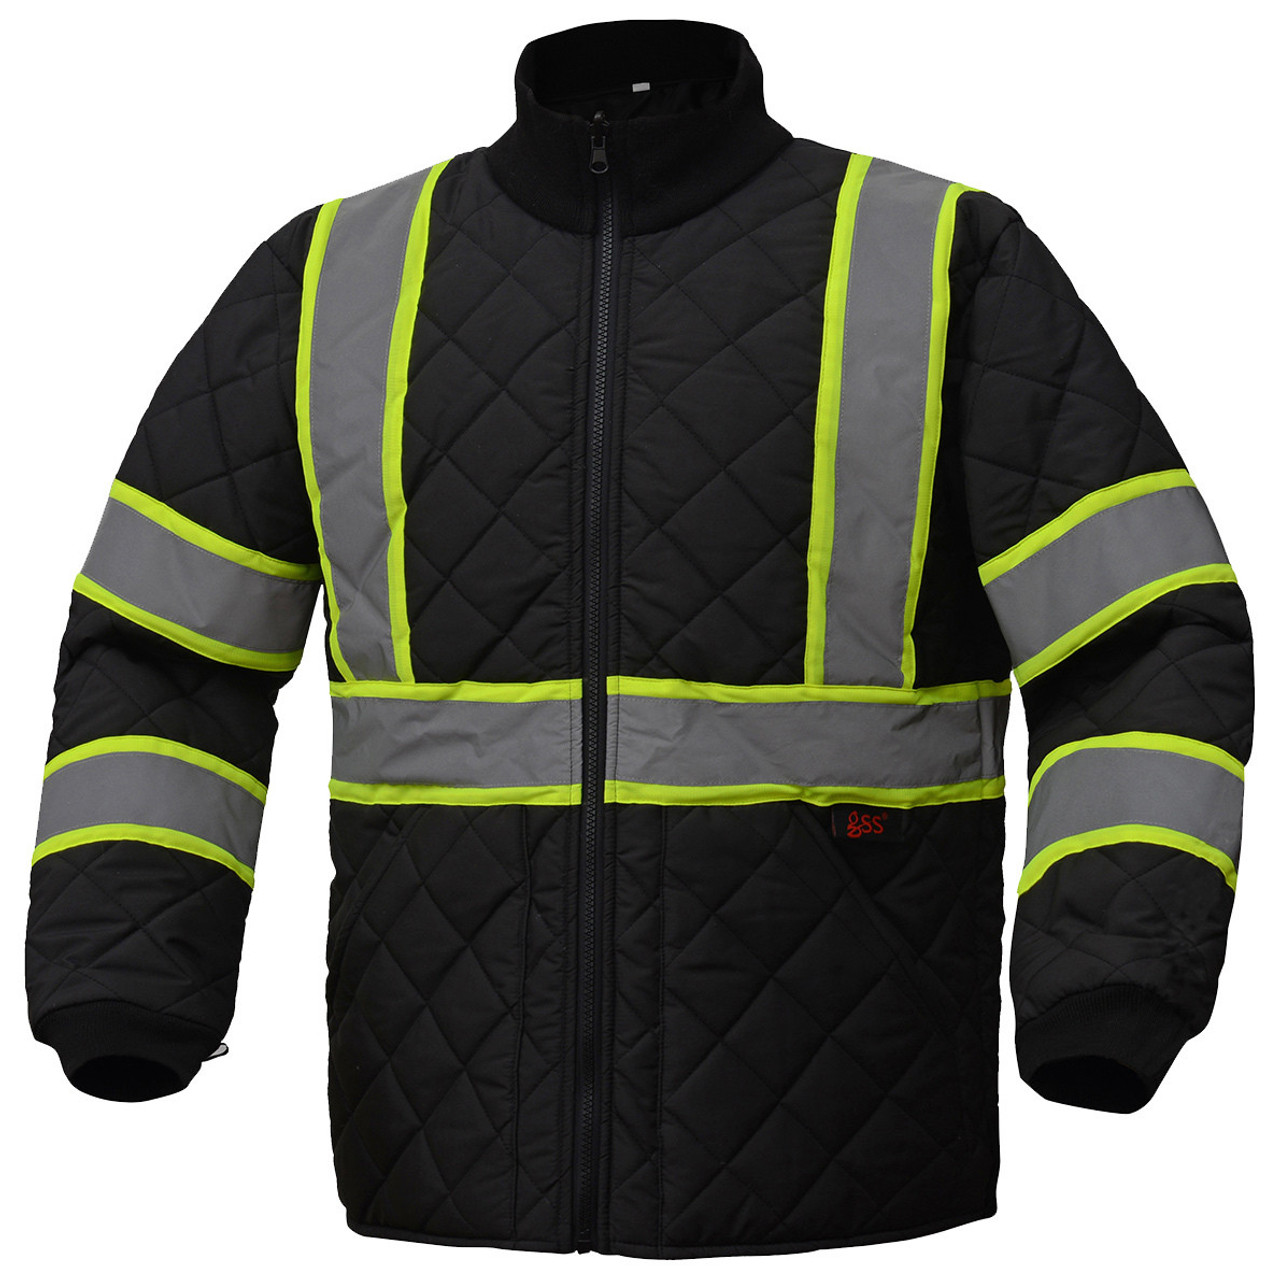 GSS Safety Apparel Quilted G&S Two-Tone Hi-Vis 8009 Safety Products Jacket - : | Non-ANSI Black